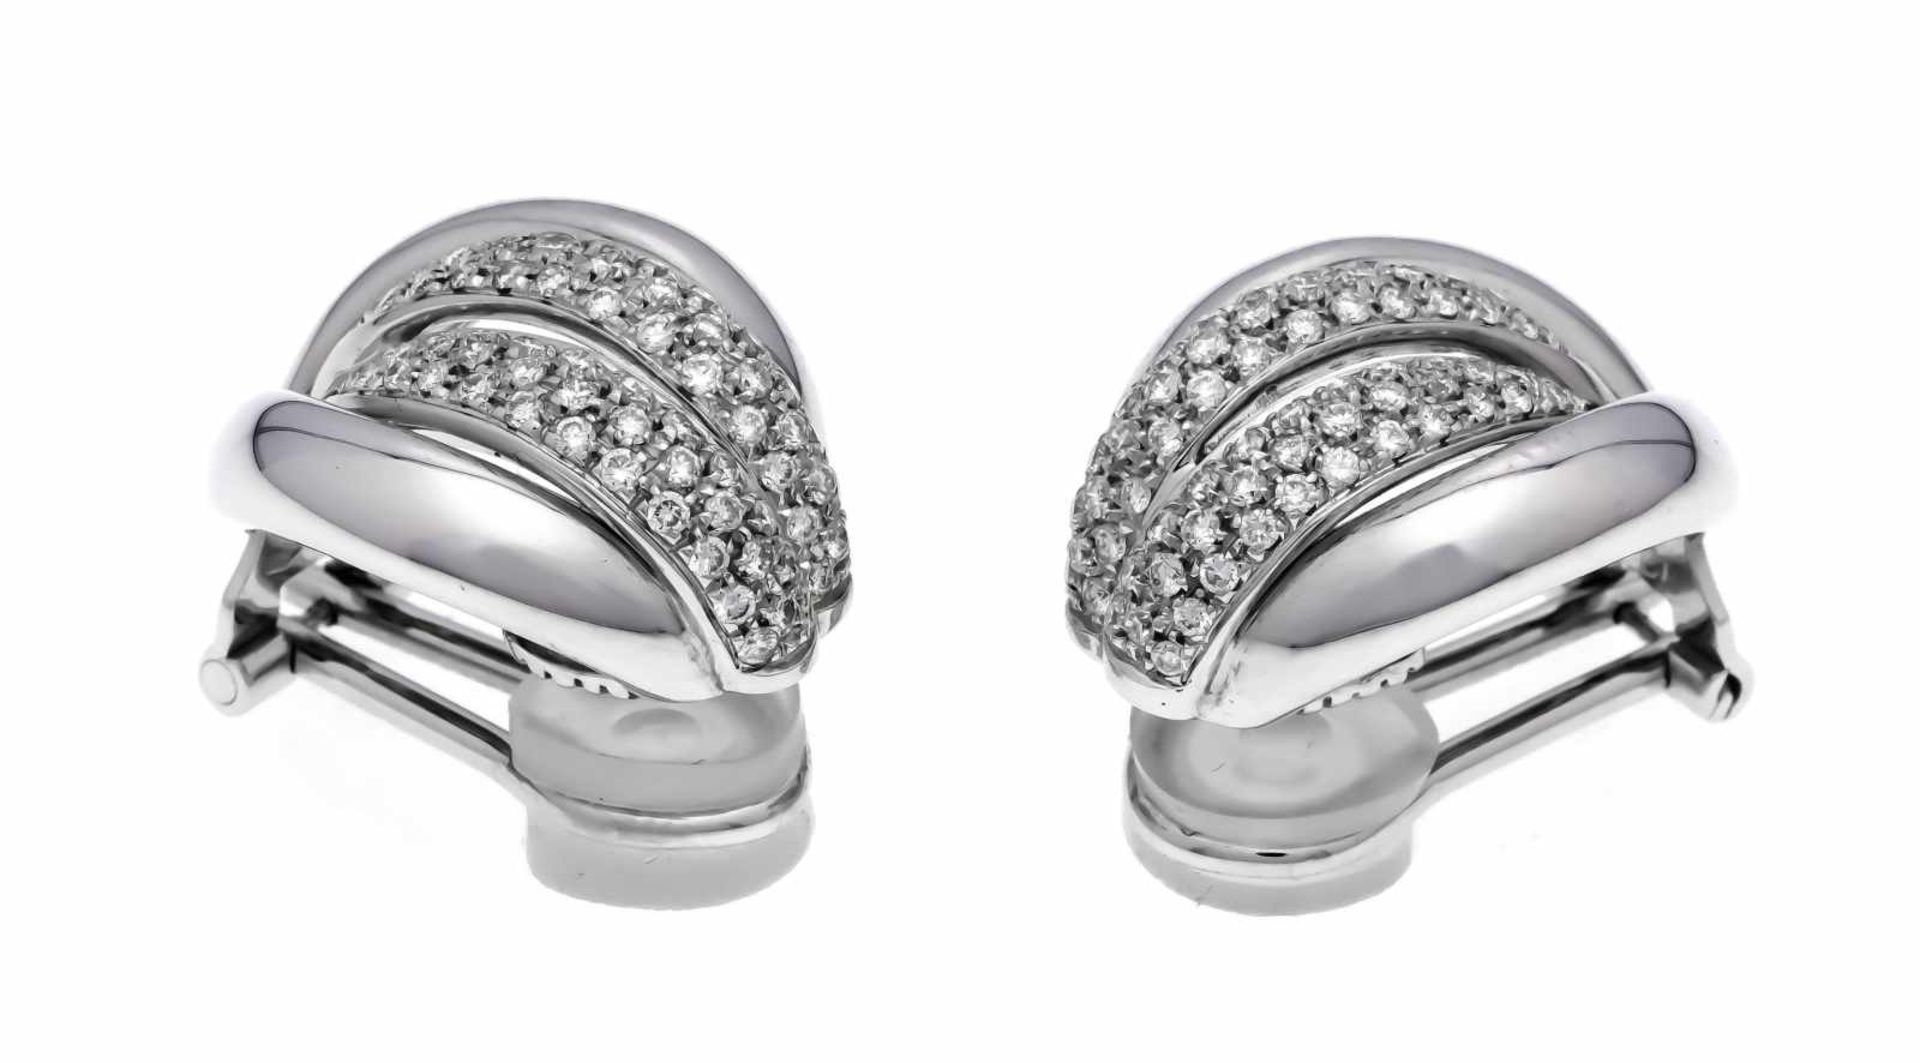 Brilliant ear clips WG 750/000 with diamonds, total 0.70 ct W / SI, length 21 mm, 17.4 g